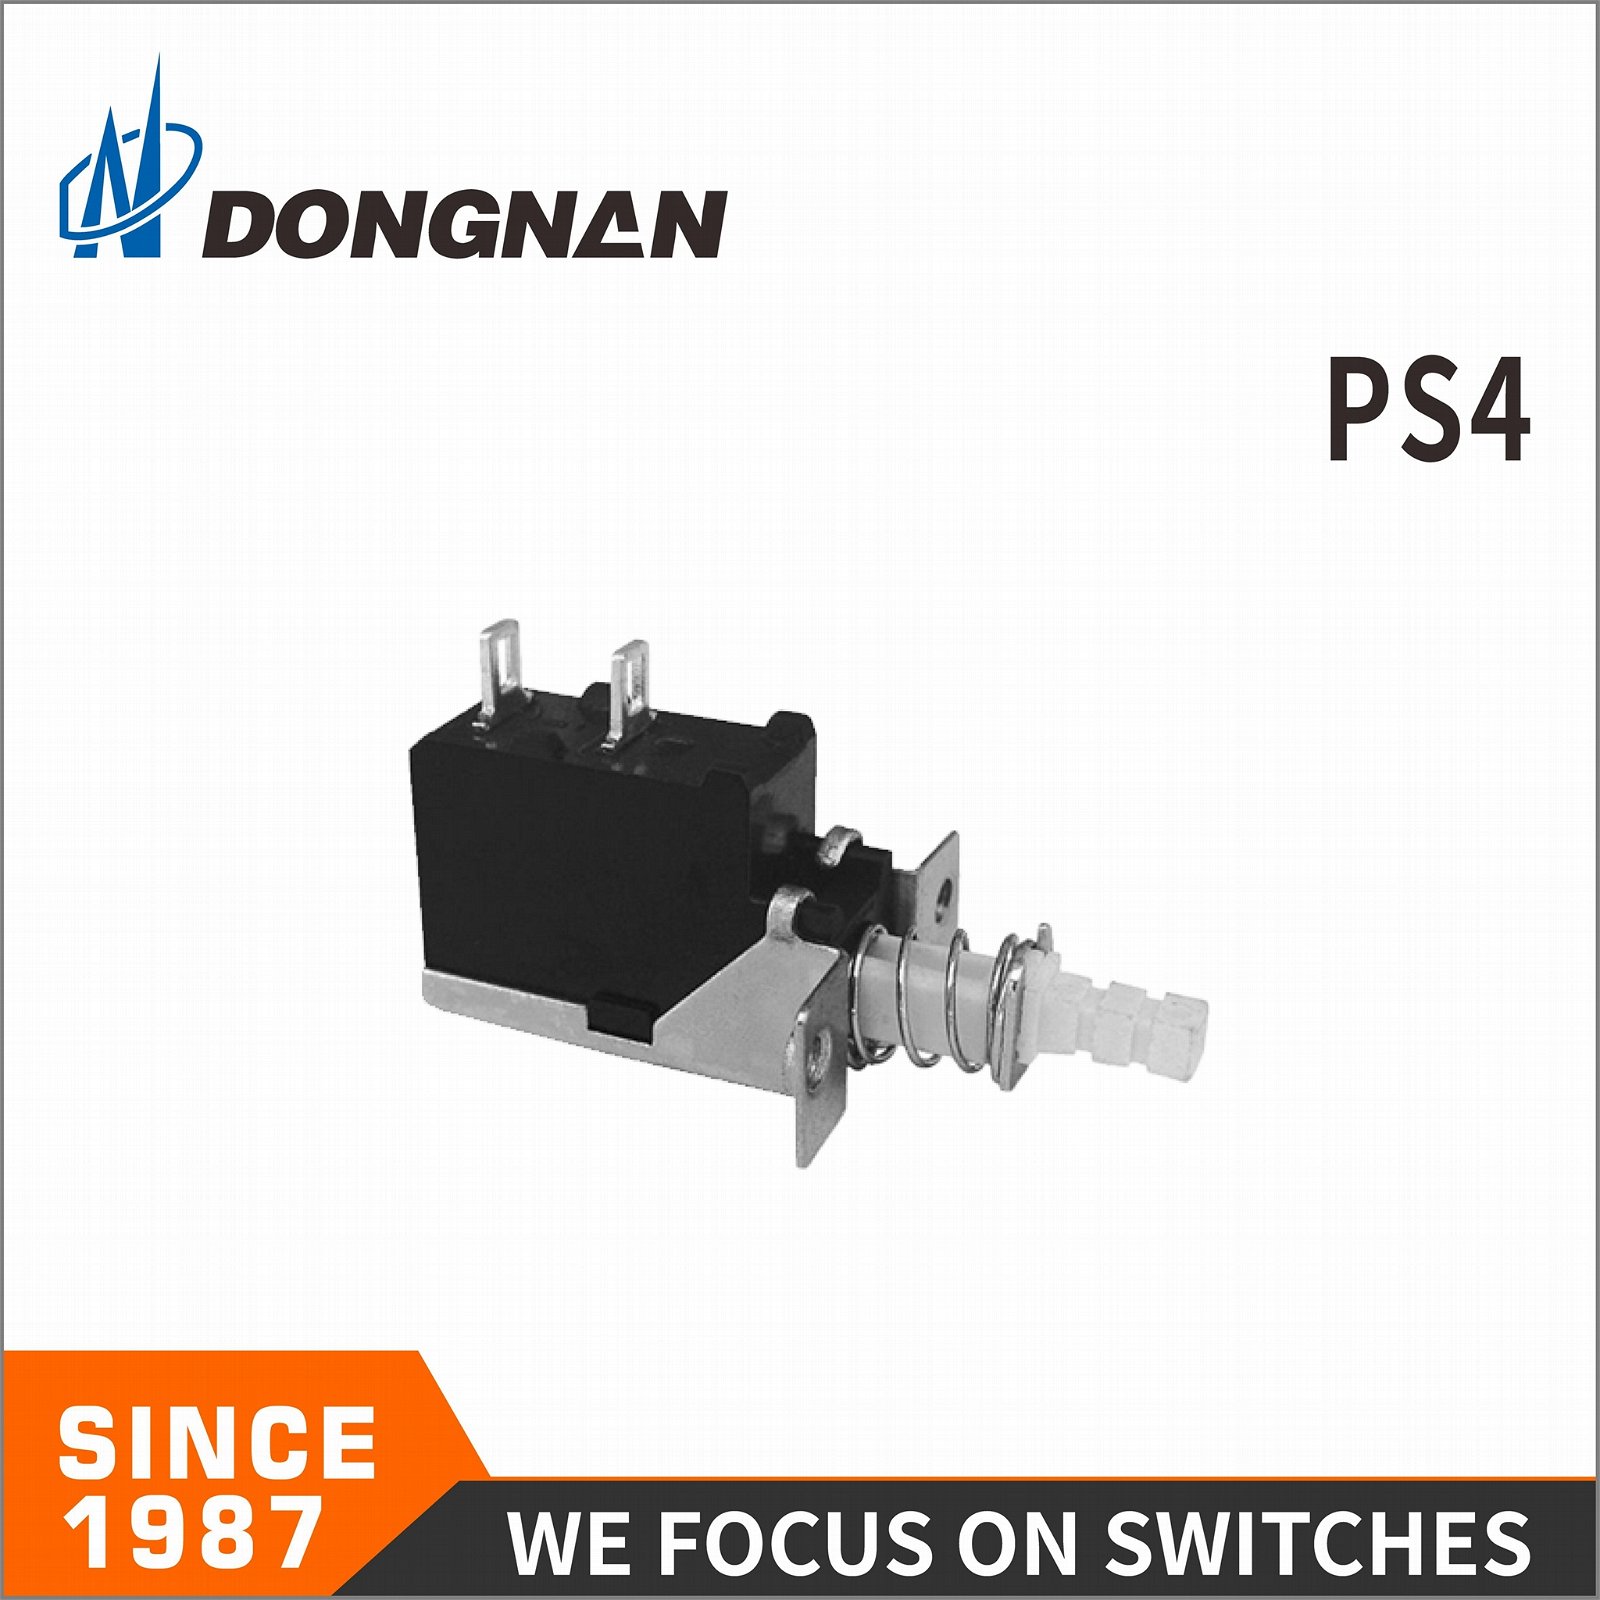 PS4 Spring Push Button Power Switch Used in Audio and Computer 3